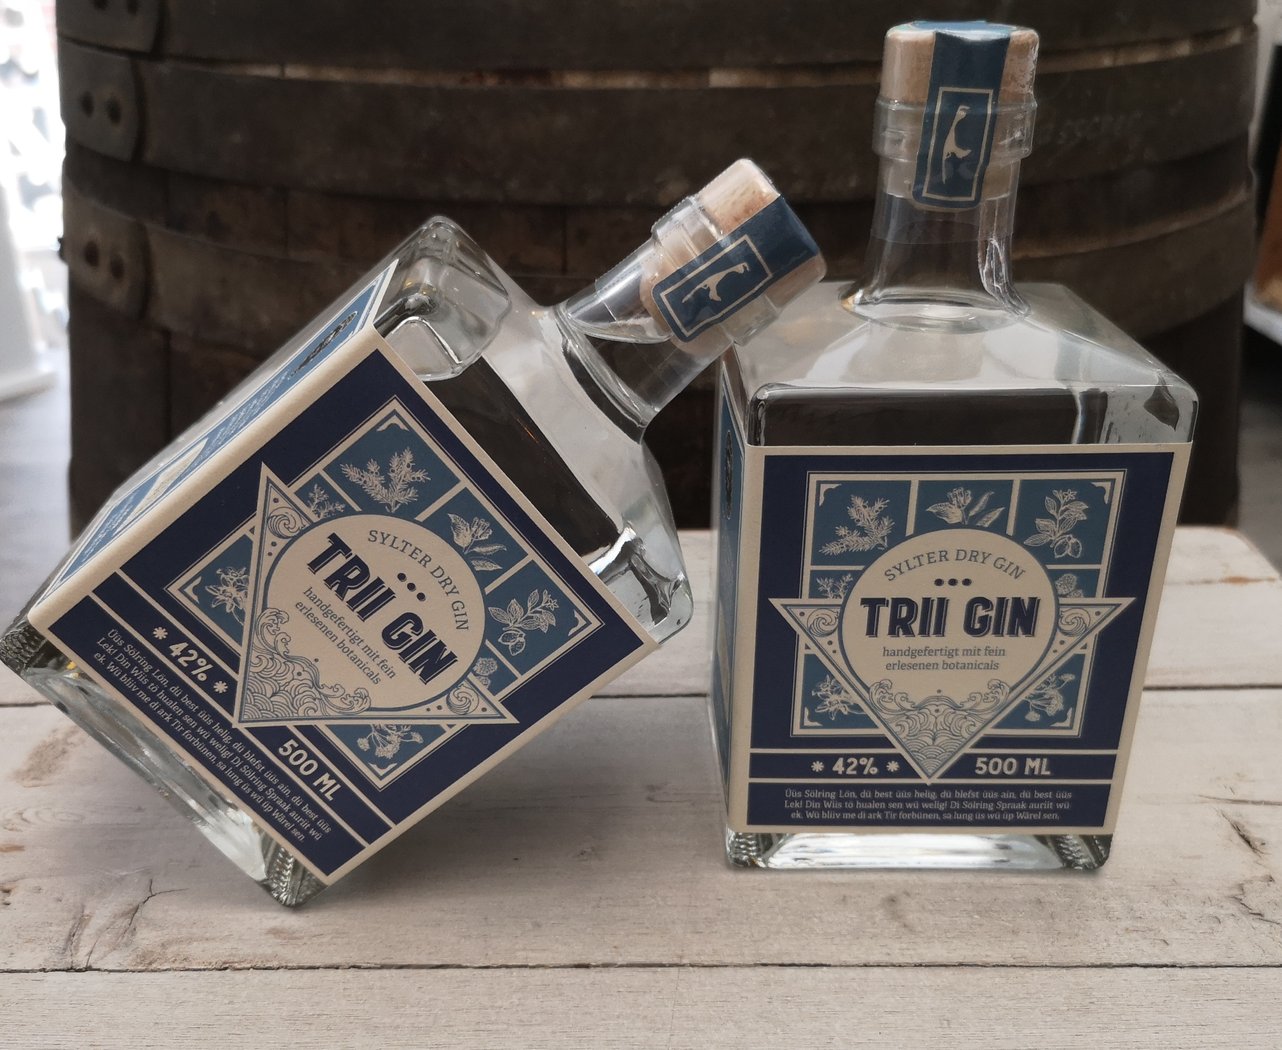 Trii Gin - Sylter Dry Gin • 500 ml, 42%vol.